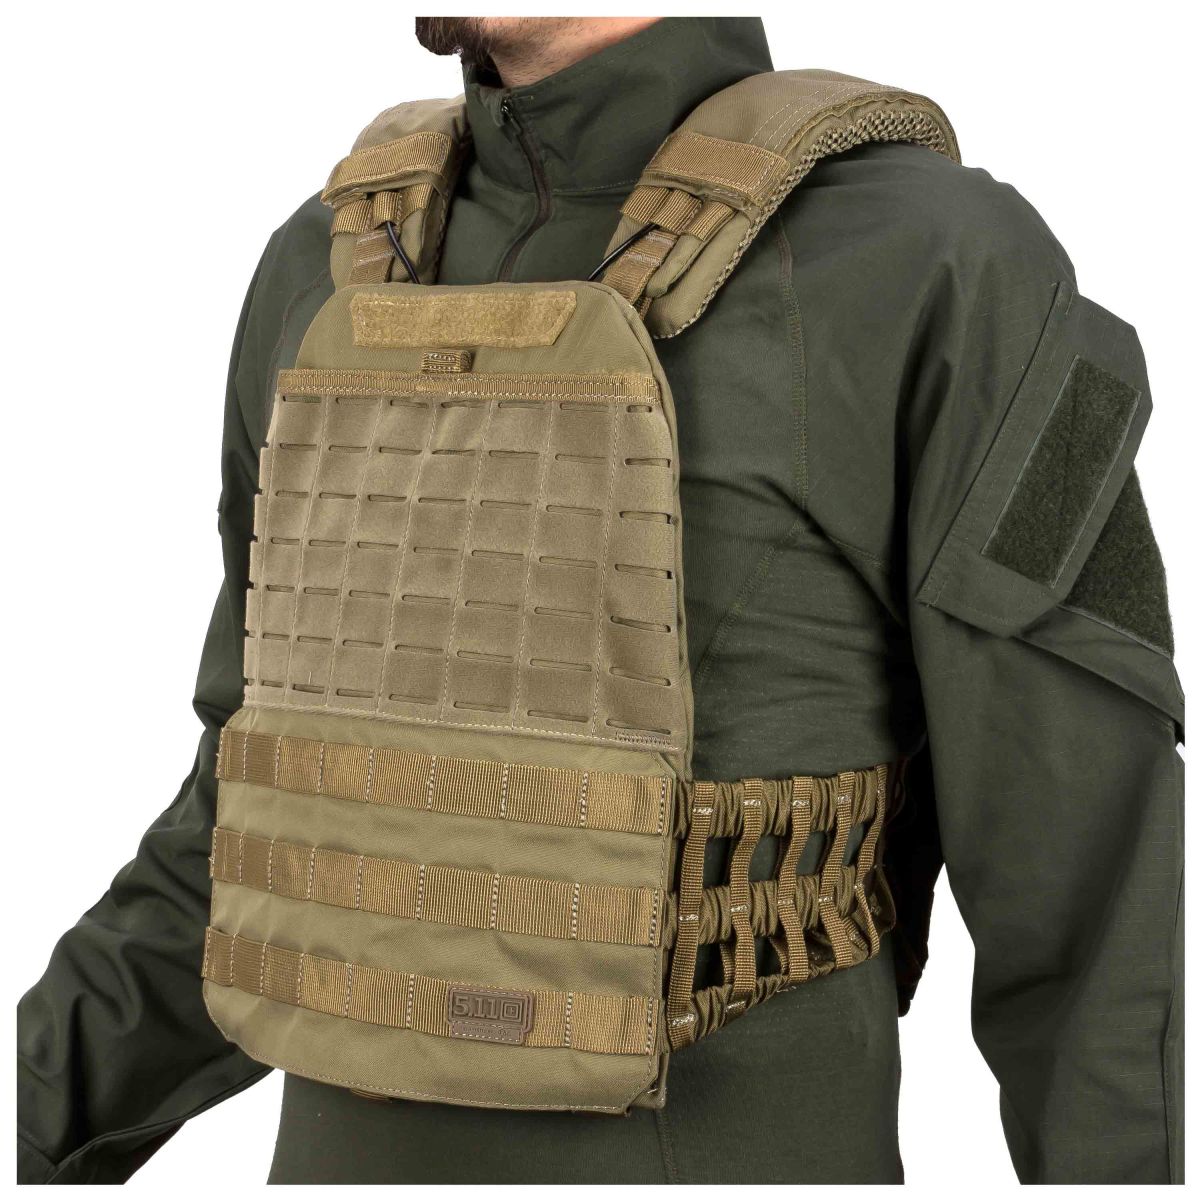 Purchase the 5.11 TacTec Plate Carrier sandstone by ASMC